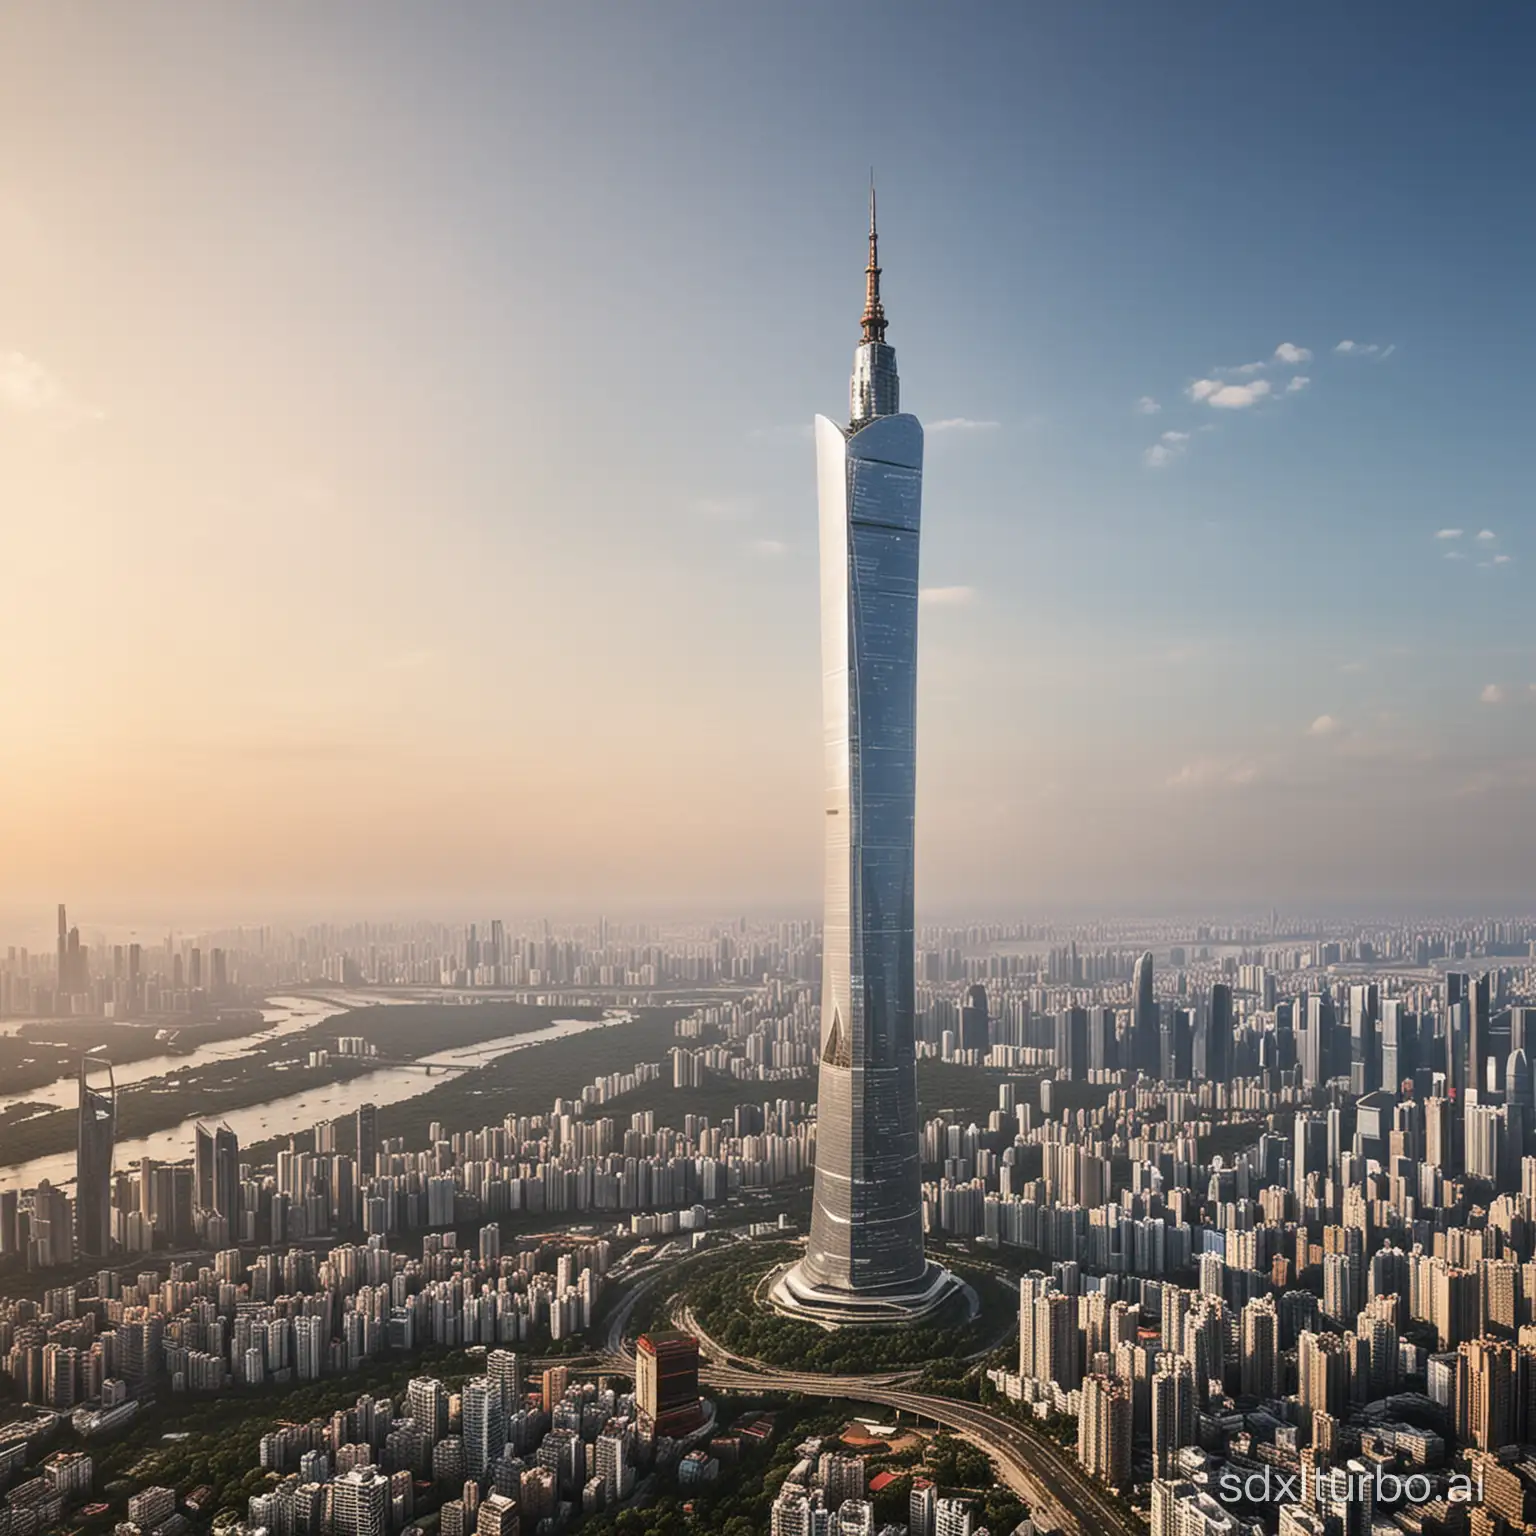 Futuristic-Guangzhou-Tower-A-Vision-of-the-Cityscape-in-100-Years